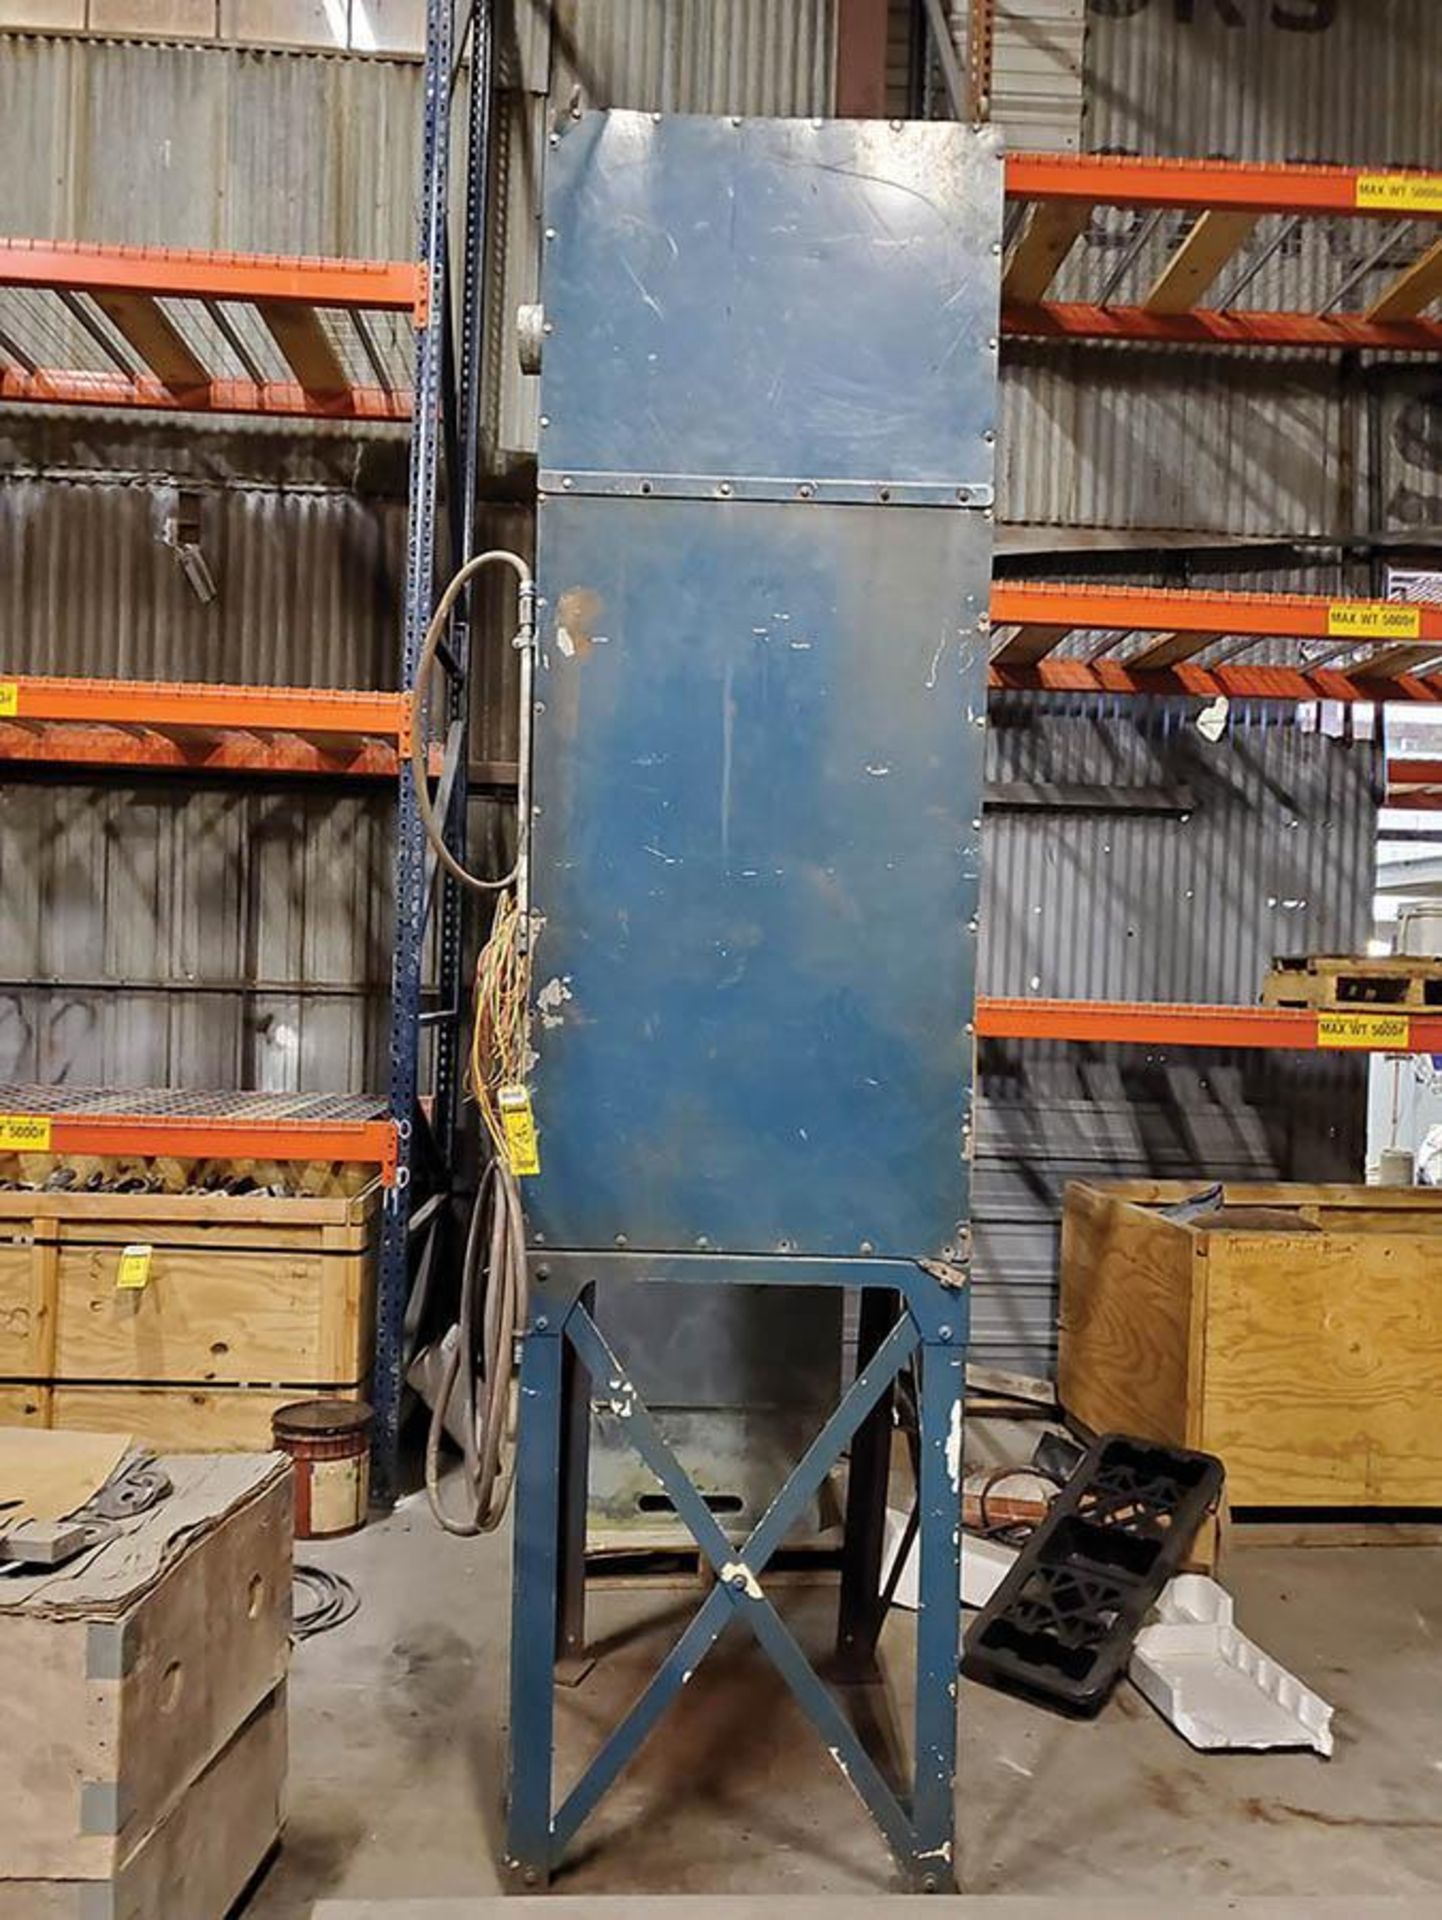 DONALDSON TORIT DUST COLLECTOR, MODEL SDF-6, 3,450 RPM, 10 HP, S/N IG515233-001 - Image 7 of 7